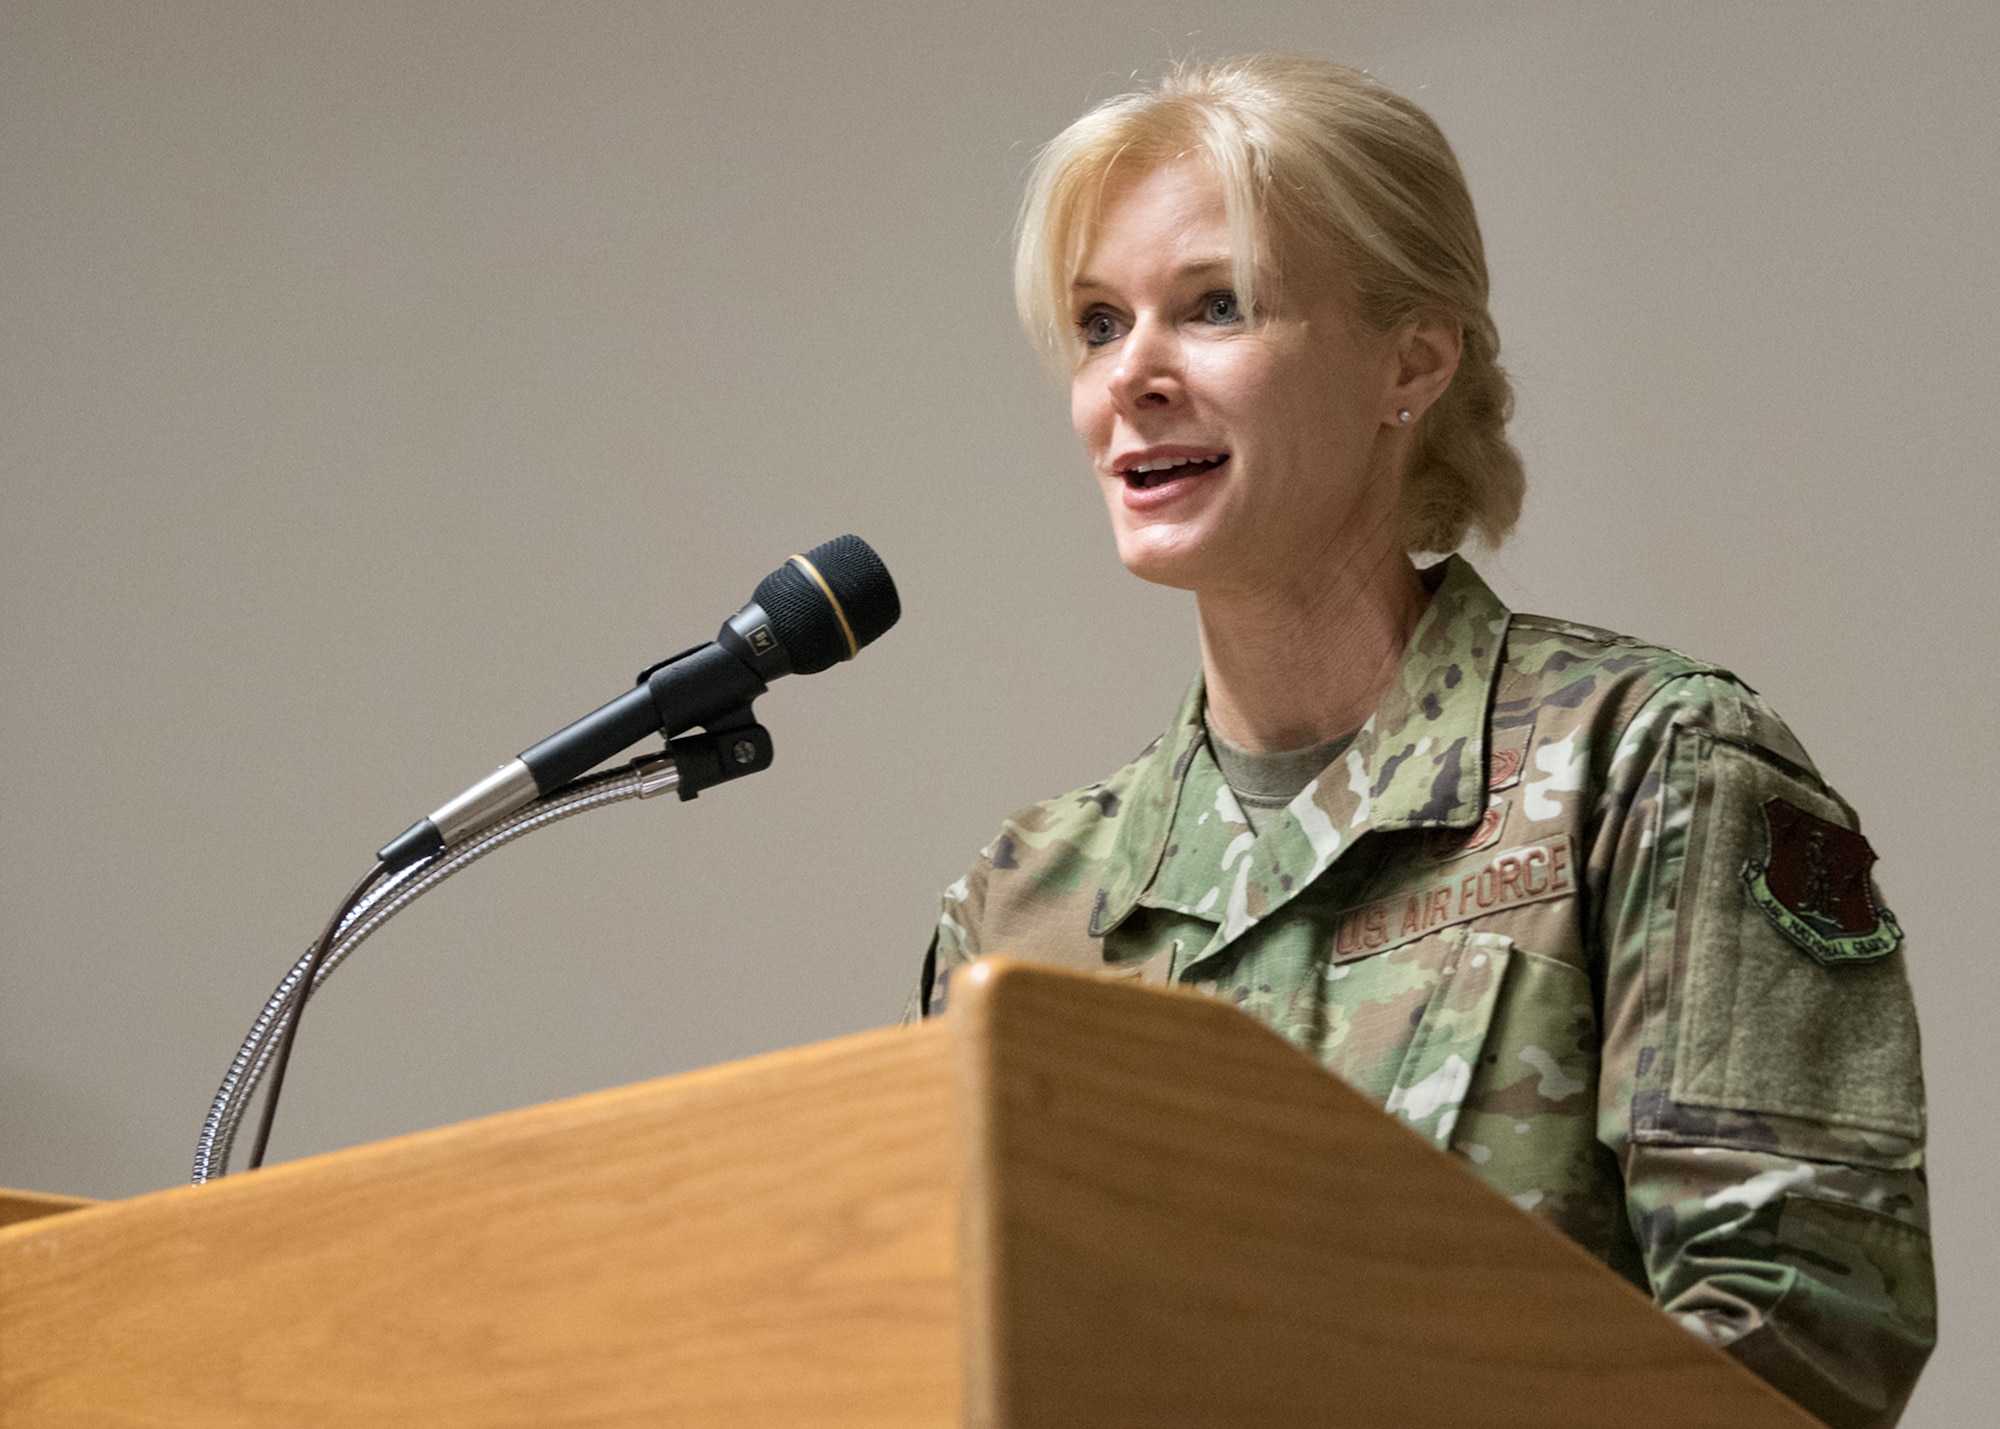 Col. Mary Decker, commander of the 123rd Mission Support Group, speaks to audience members at an MSG change-of-command ceremony held at the Kentucky Air National Guard base in Louisville, Ky., Jan. 5, 2019. Decker is replacing Col. Patrick Pritchard, who has been named vice commander of the 123rd Airlift Wing. (U.S. Air National Guard photo by Master Sgt. Phil Speck)